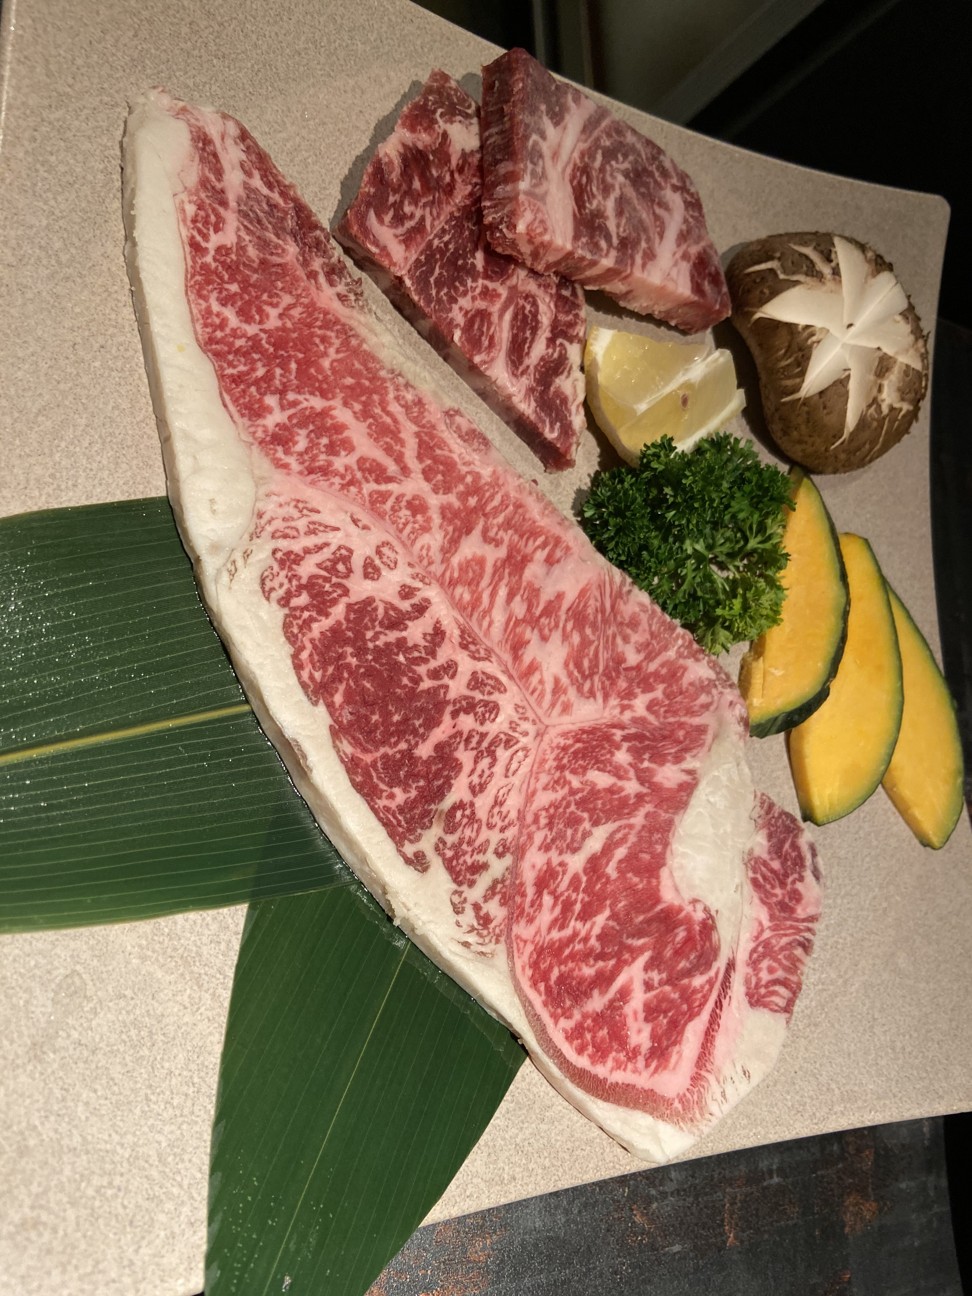 The hanwoo sirloin should be cooked only briefly, otherwise it gets tough. Photo: Susan Jung